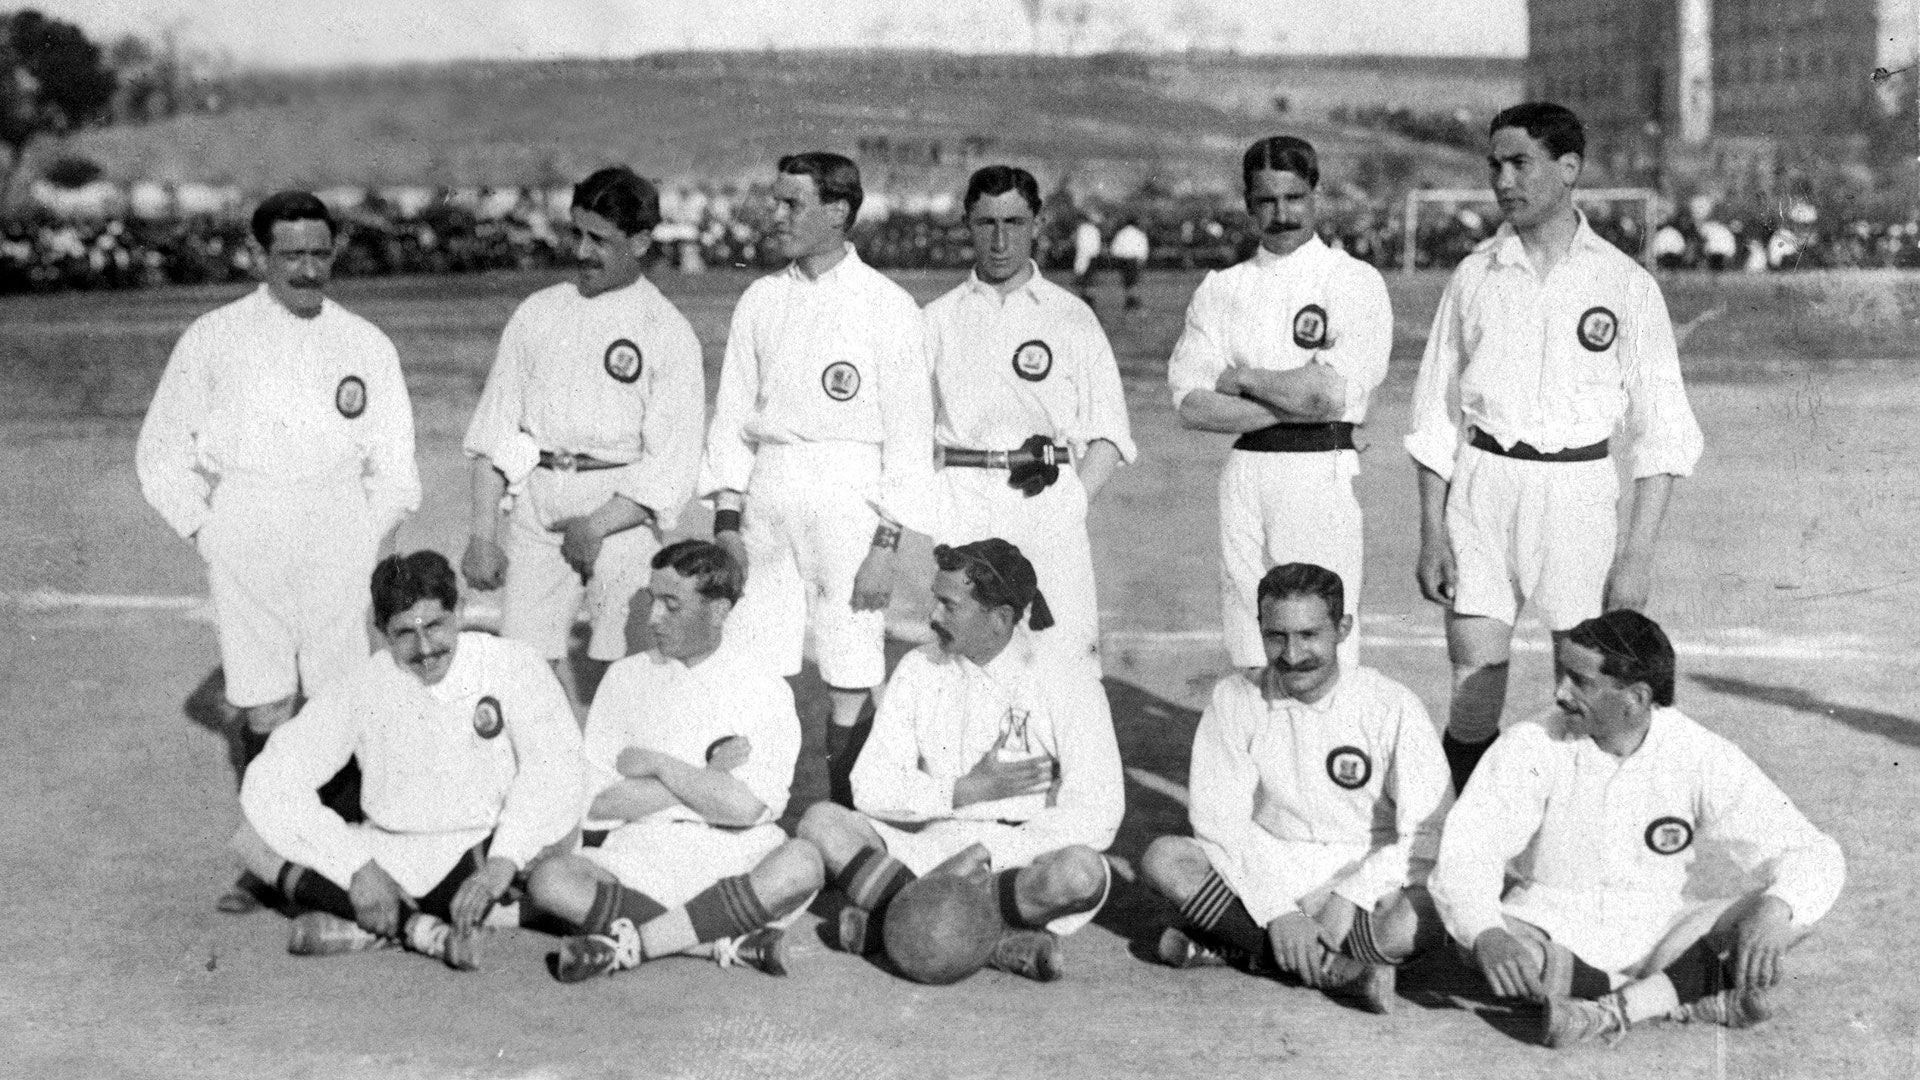 We won our third Spanish Cup 117 years ago